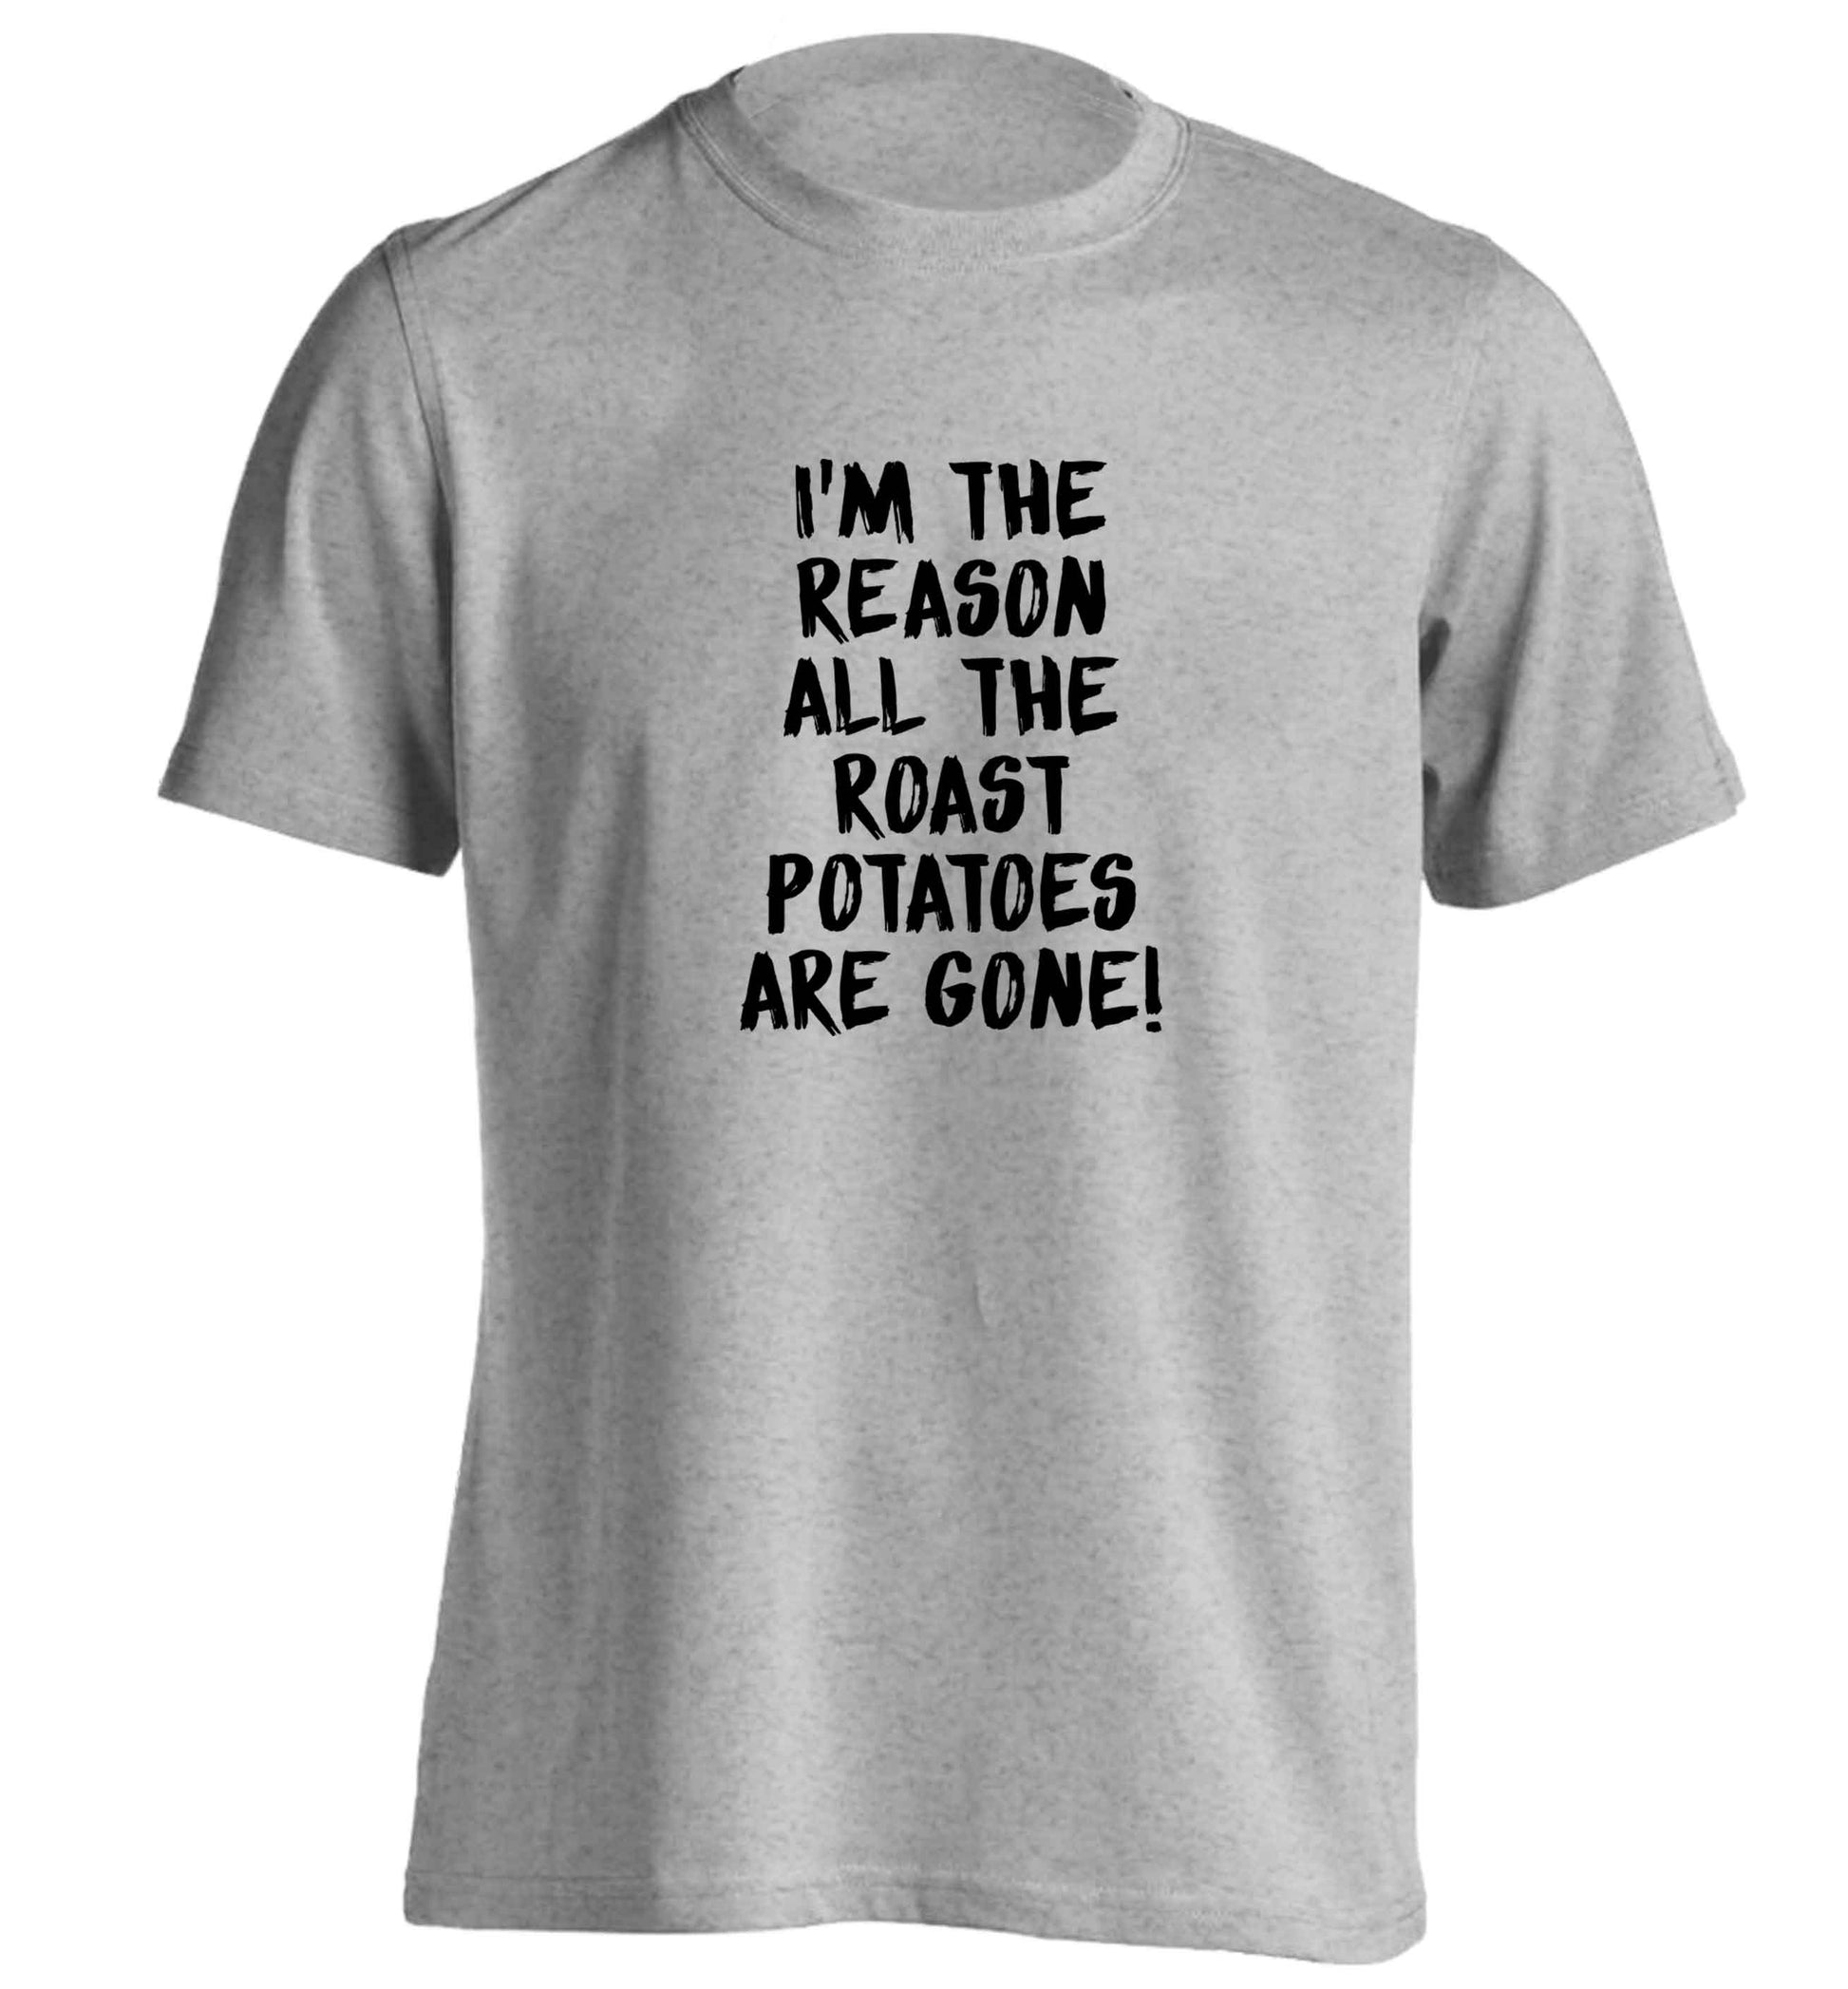 I'm the reason all the roast potatoes are gone adults unisex grey Tshirt 2XL